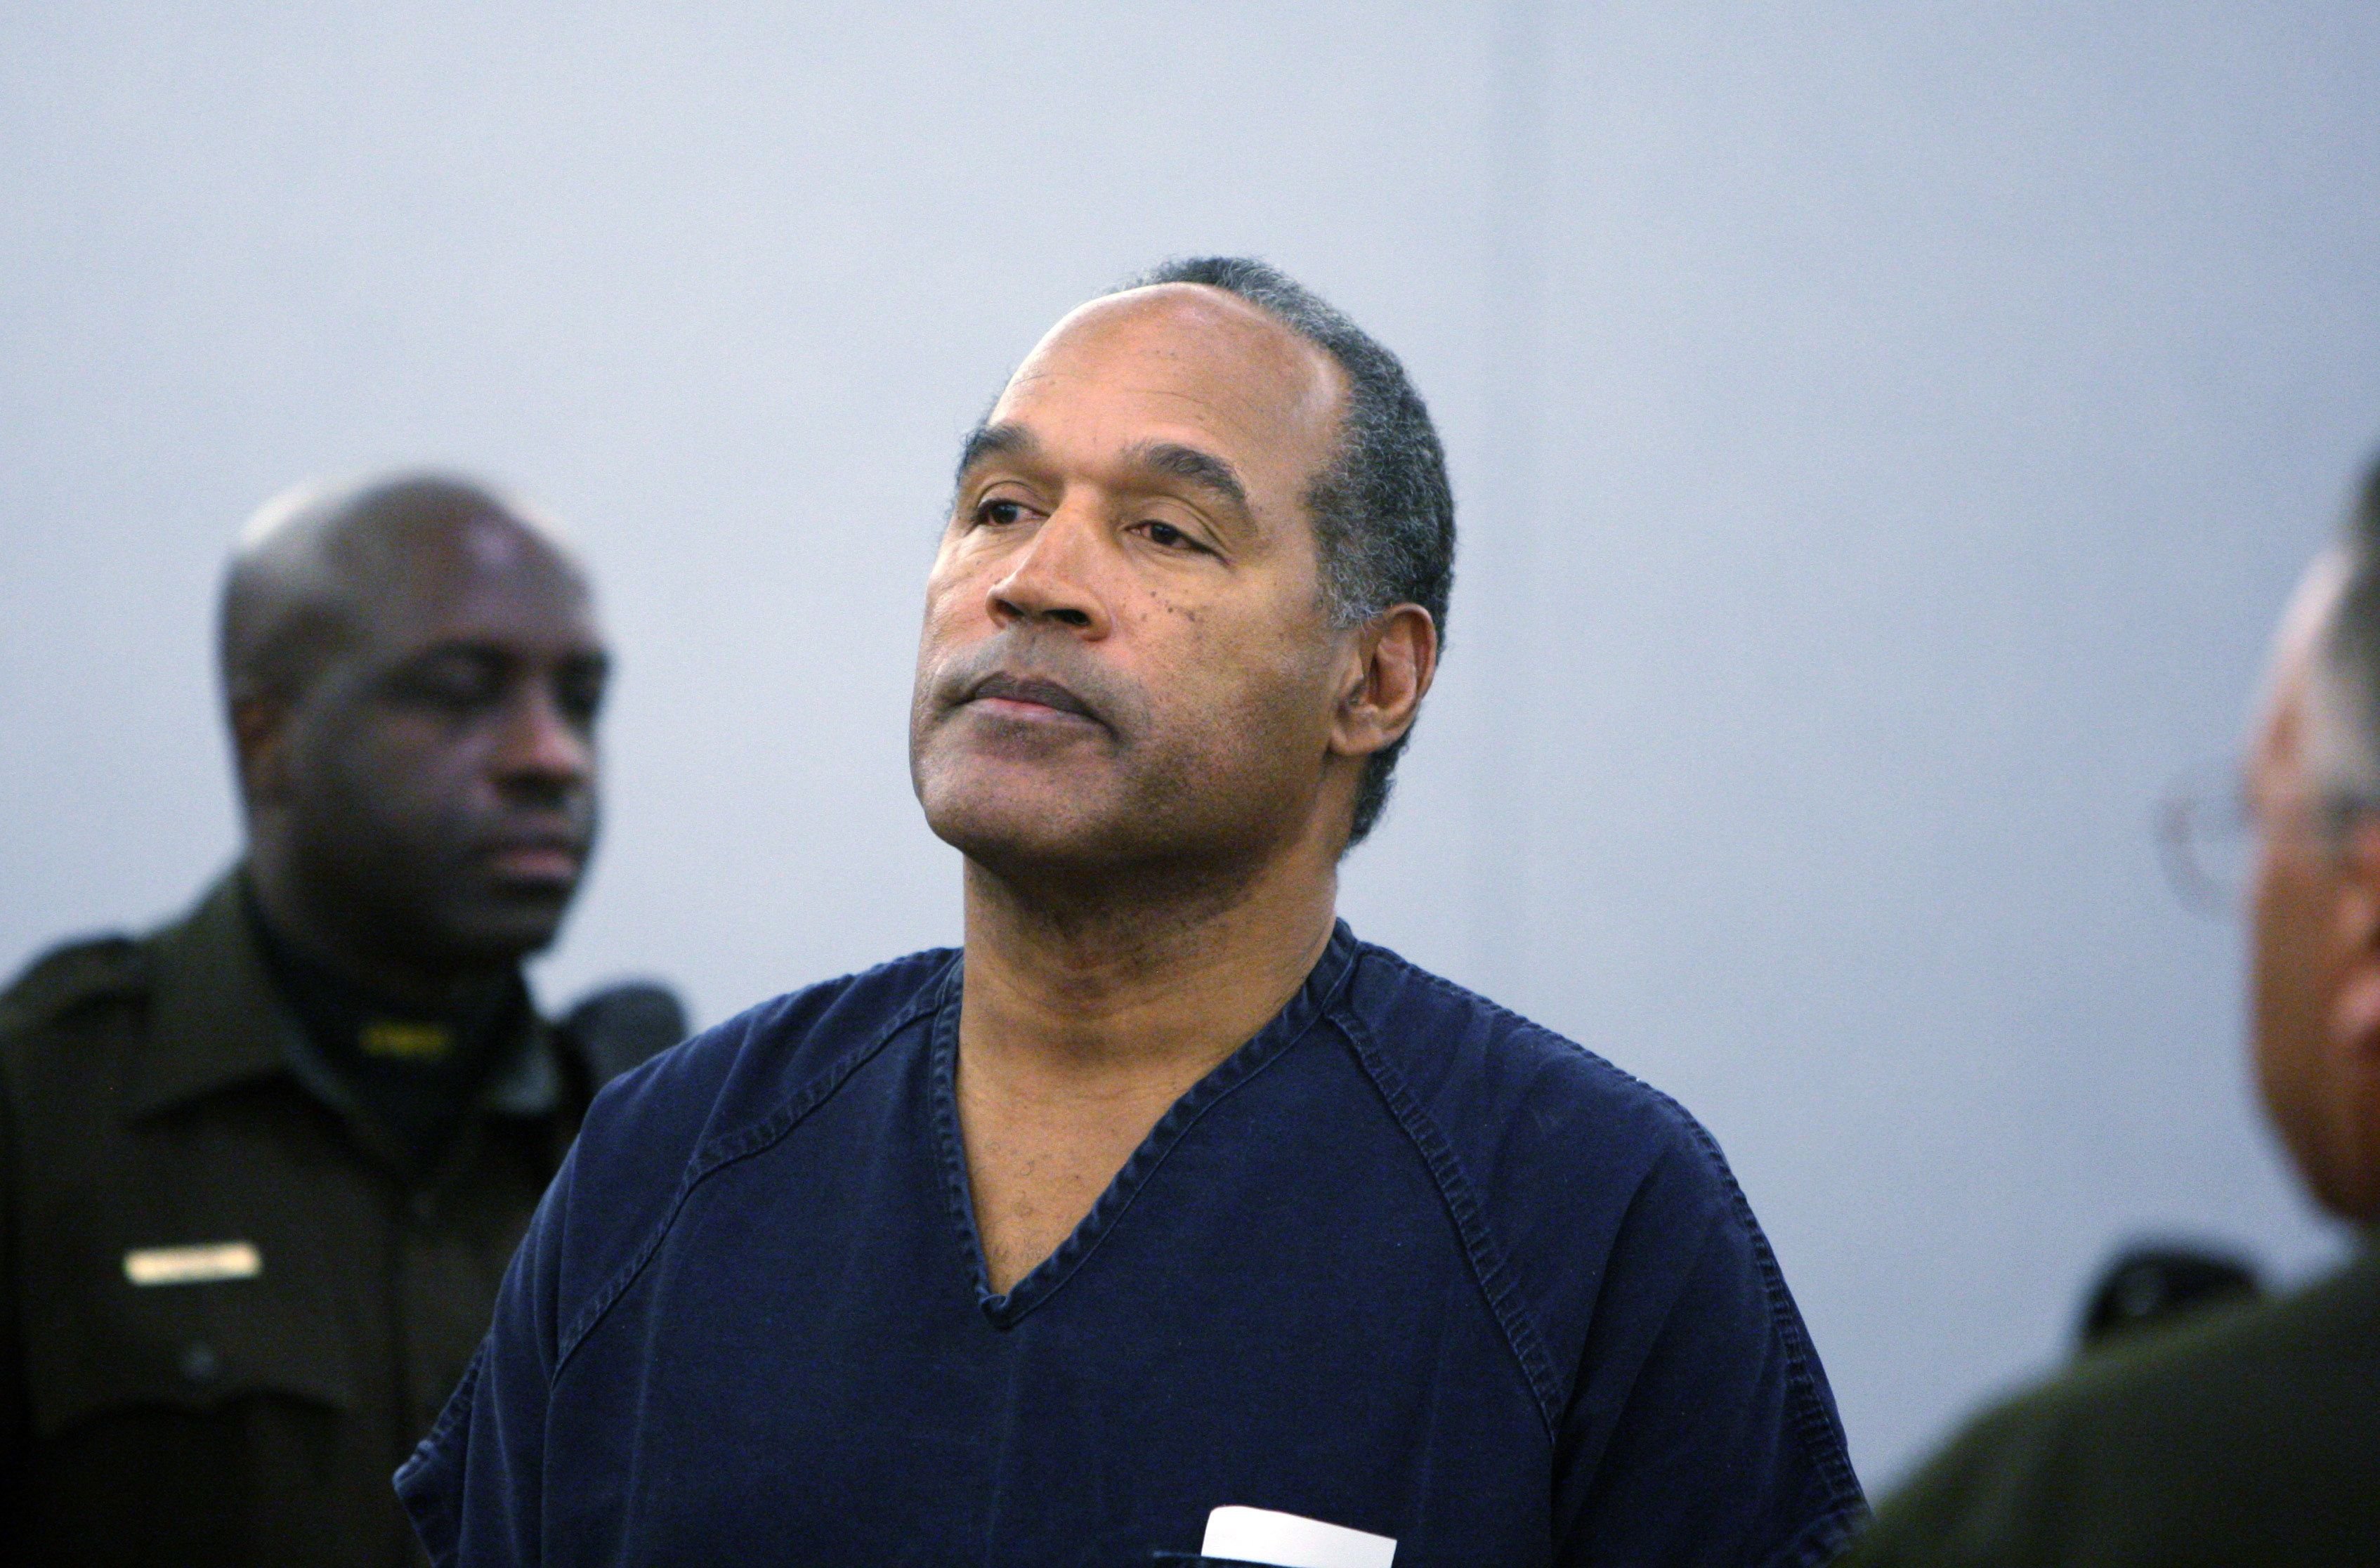  O.J. Simpson at his sentencing at the Clark County Regional Justice Center in 2008 in Las Vegas, Nevada | Source: Getty Images